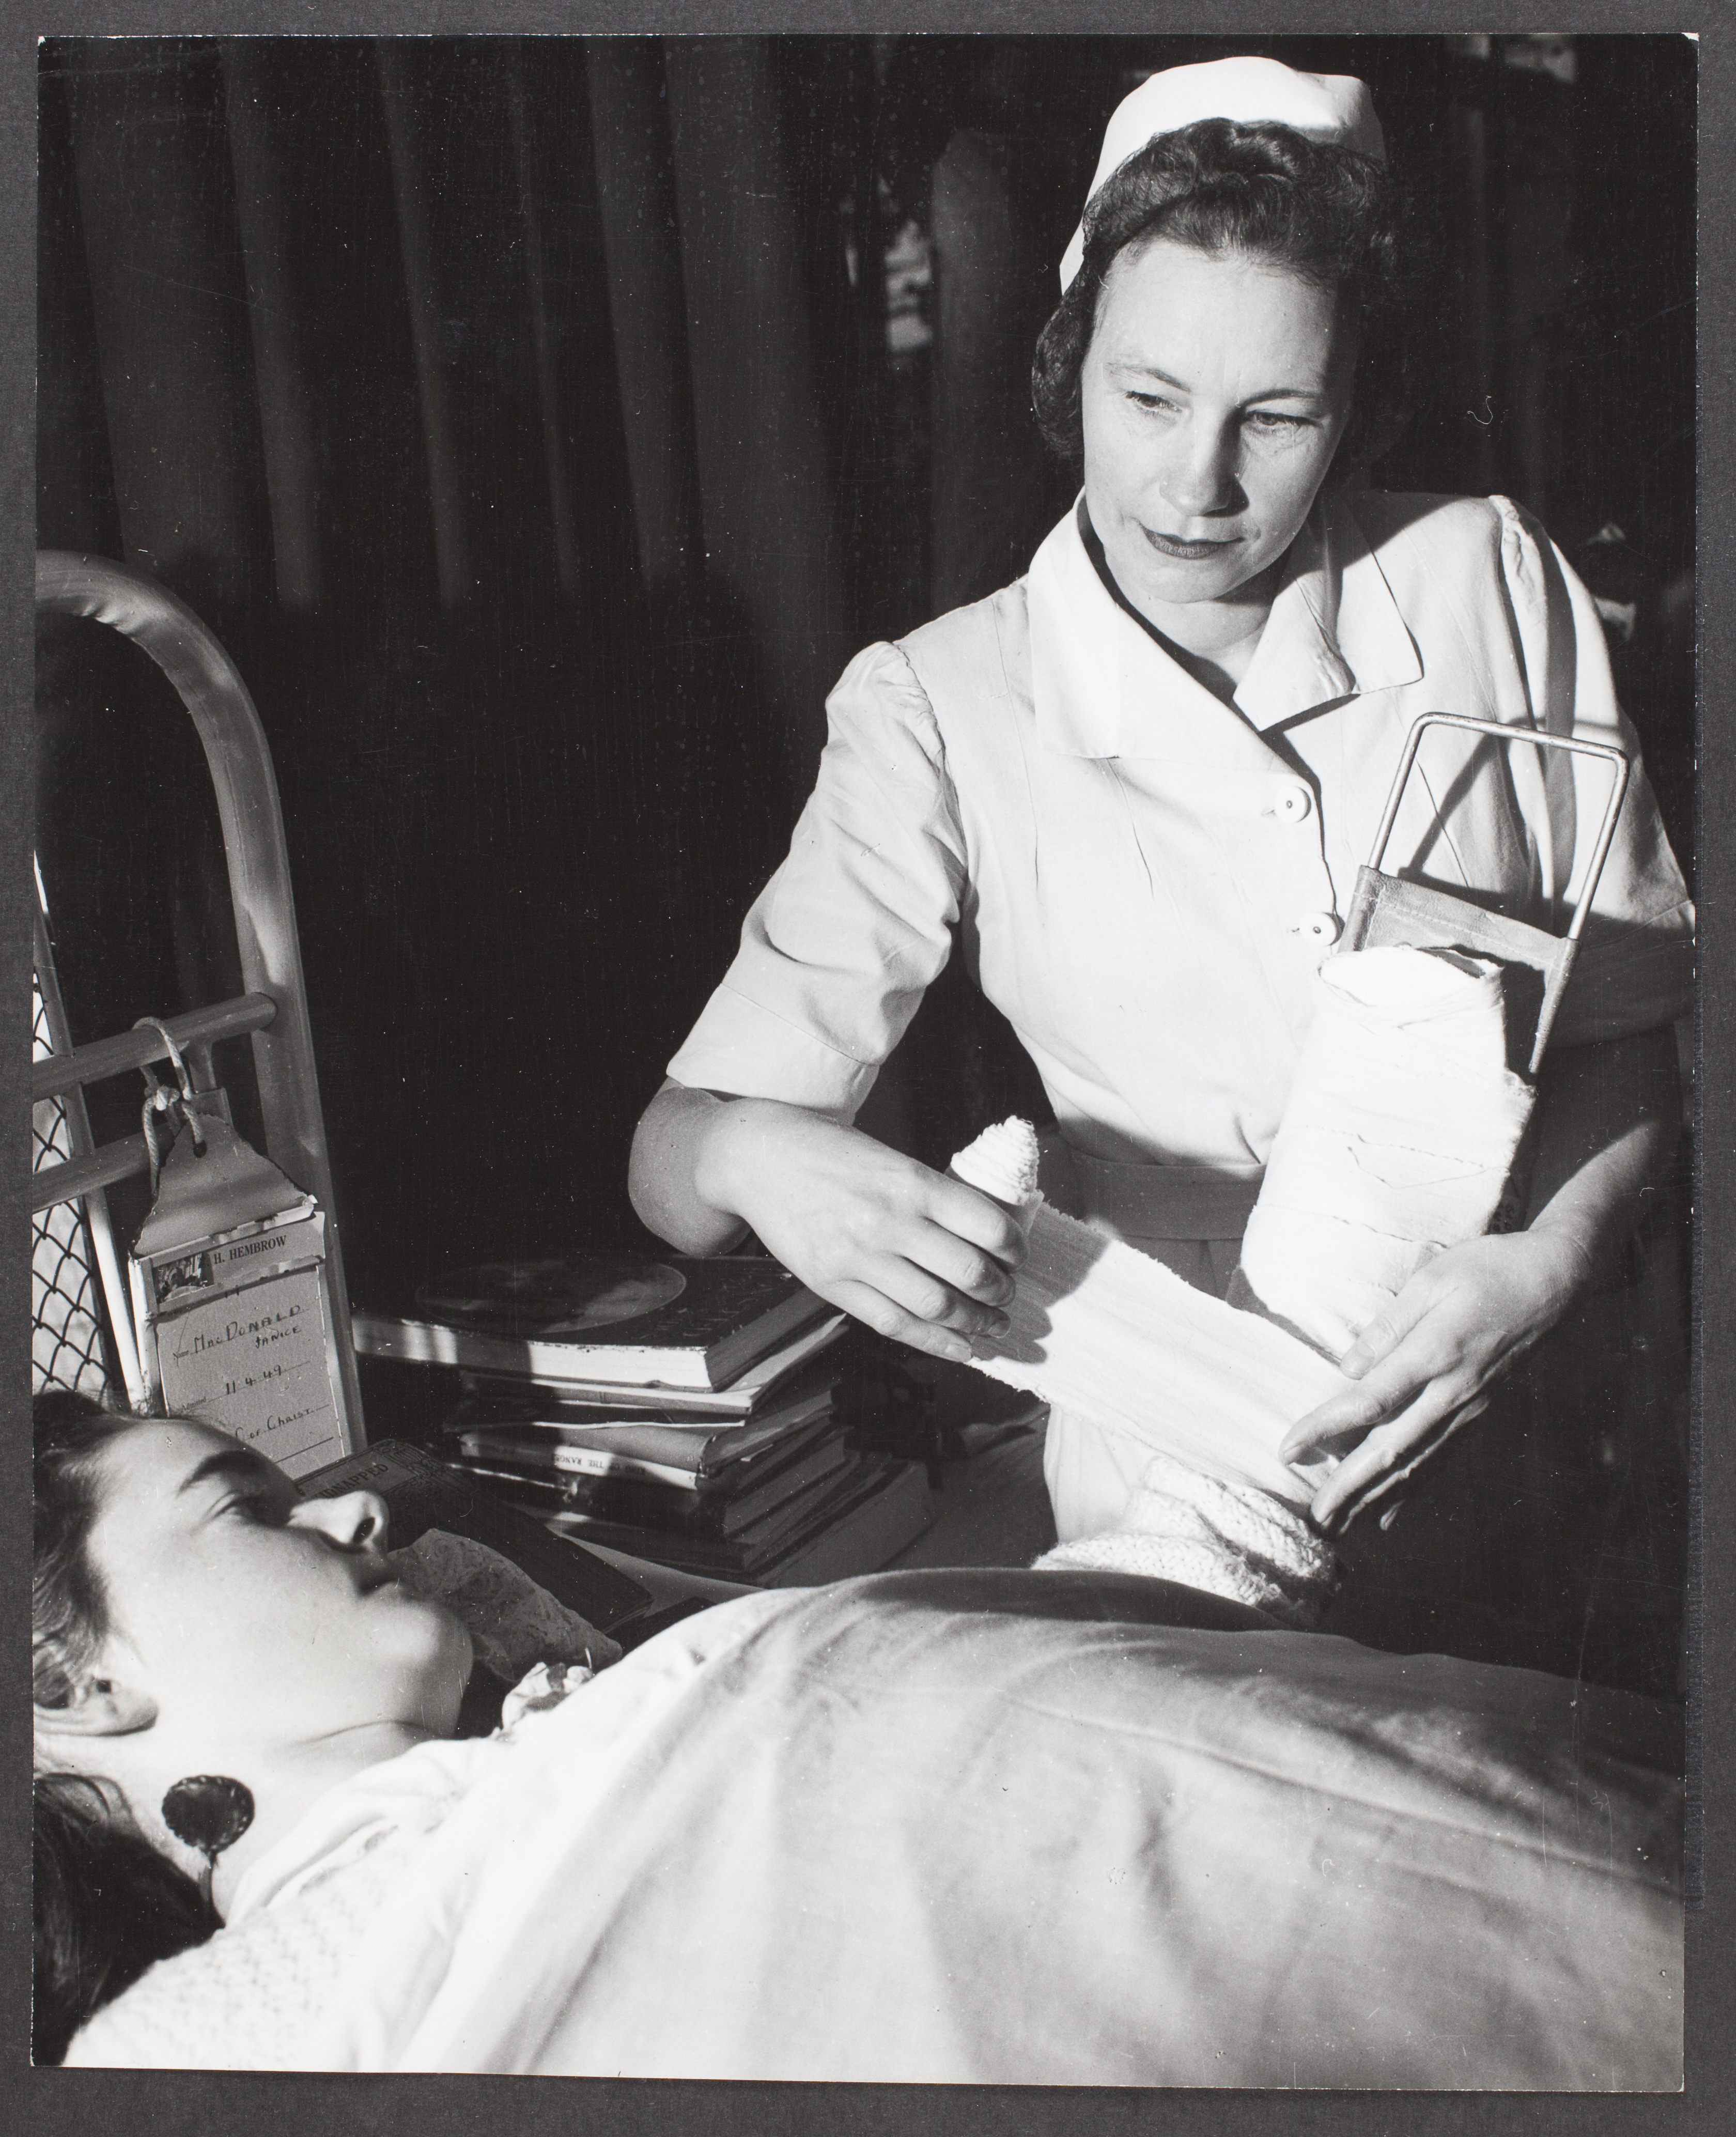 John Loughlin, “Anna Sipols, former Latvian nurse, now treats patients as a member on the nursing staff of the Austin Hospital, Melbourne”, 26 September 1949, Commercial Travellers’ Association Administrative Records and Publications, 1979.0162.03136.